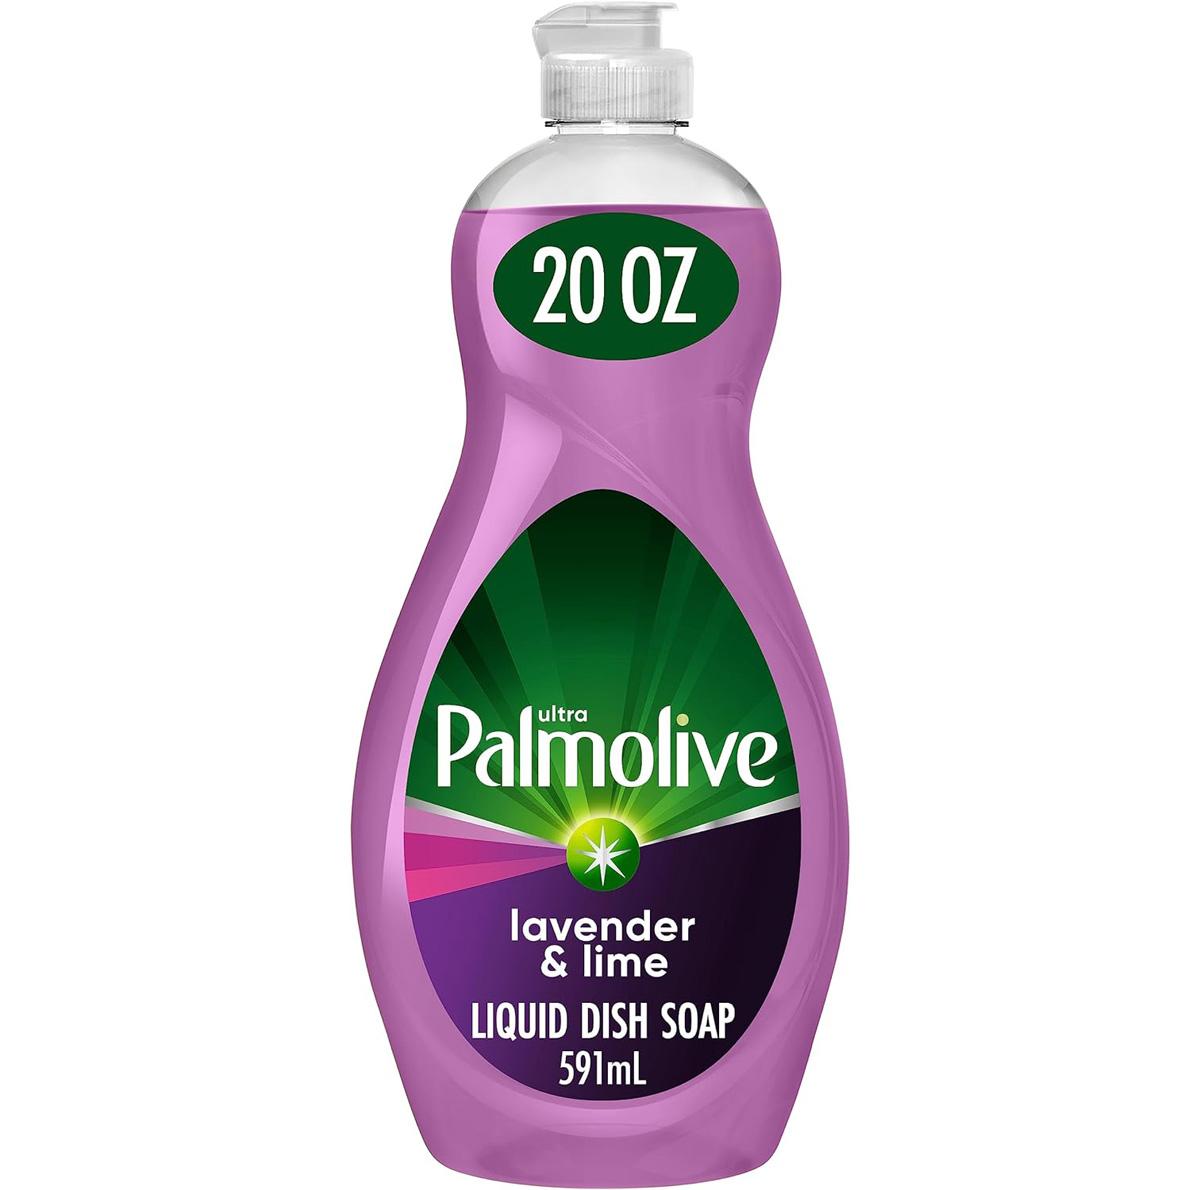 Palmolive Ultra Liquid Dish Soap Lavender and Lime for $2.03